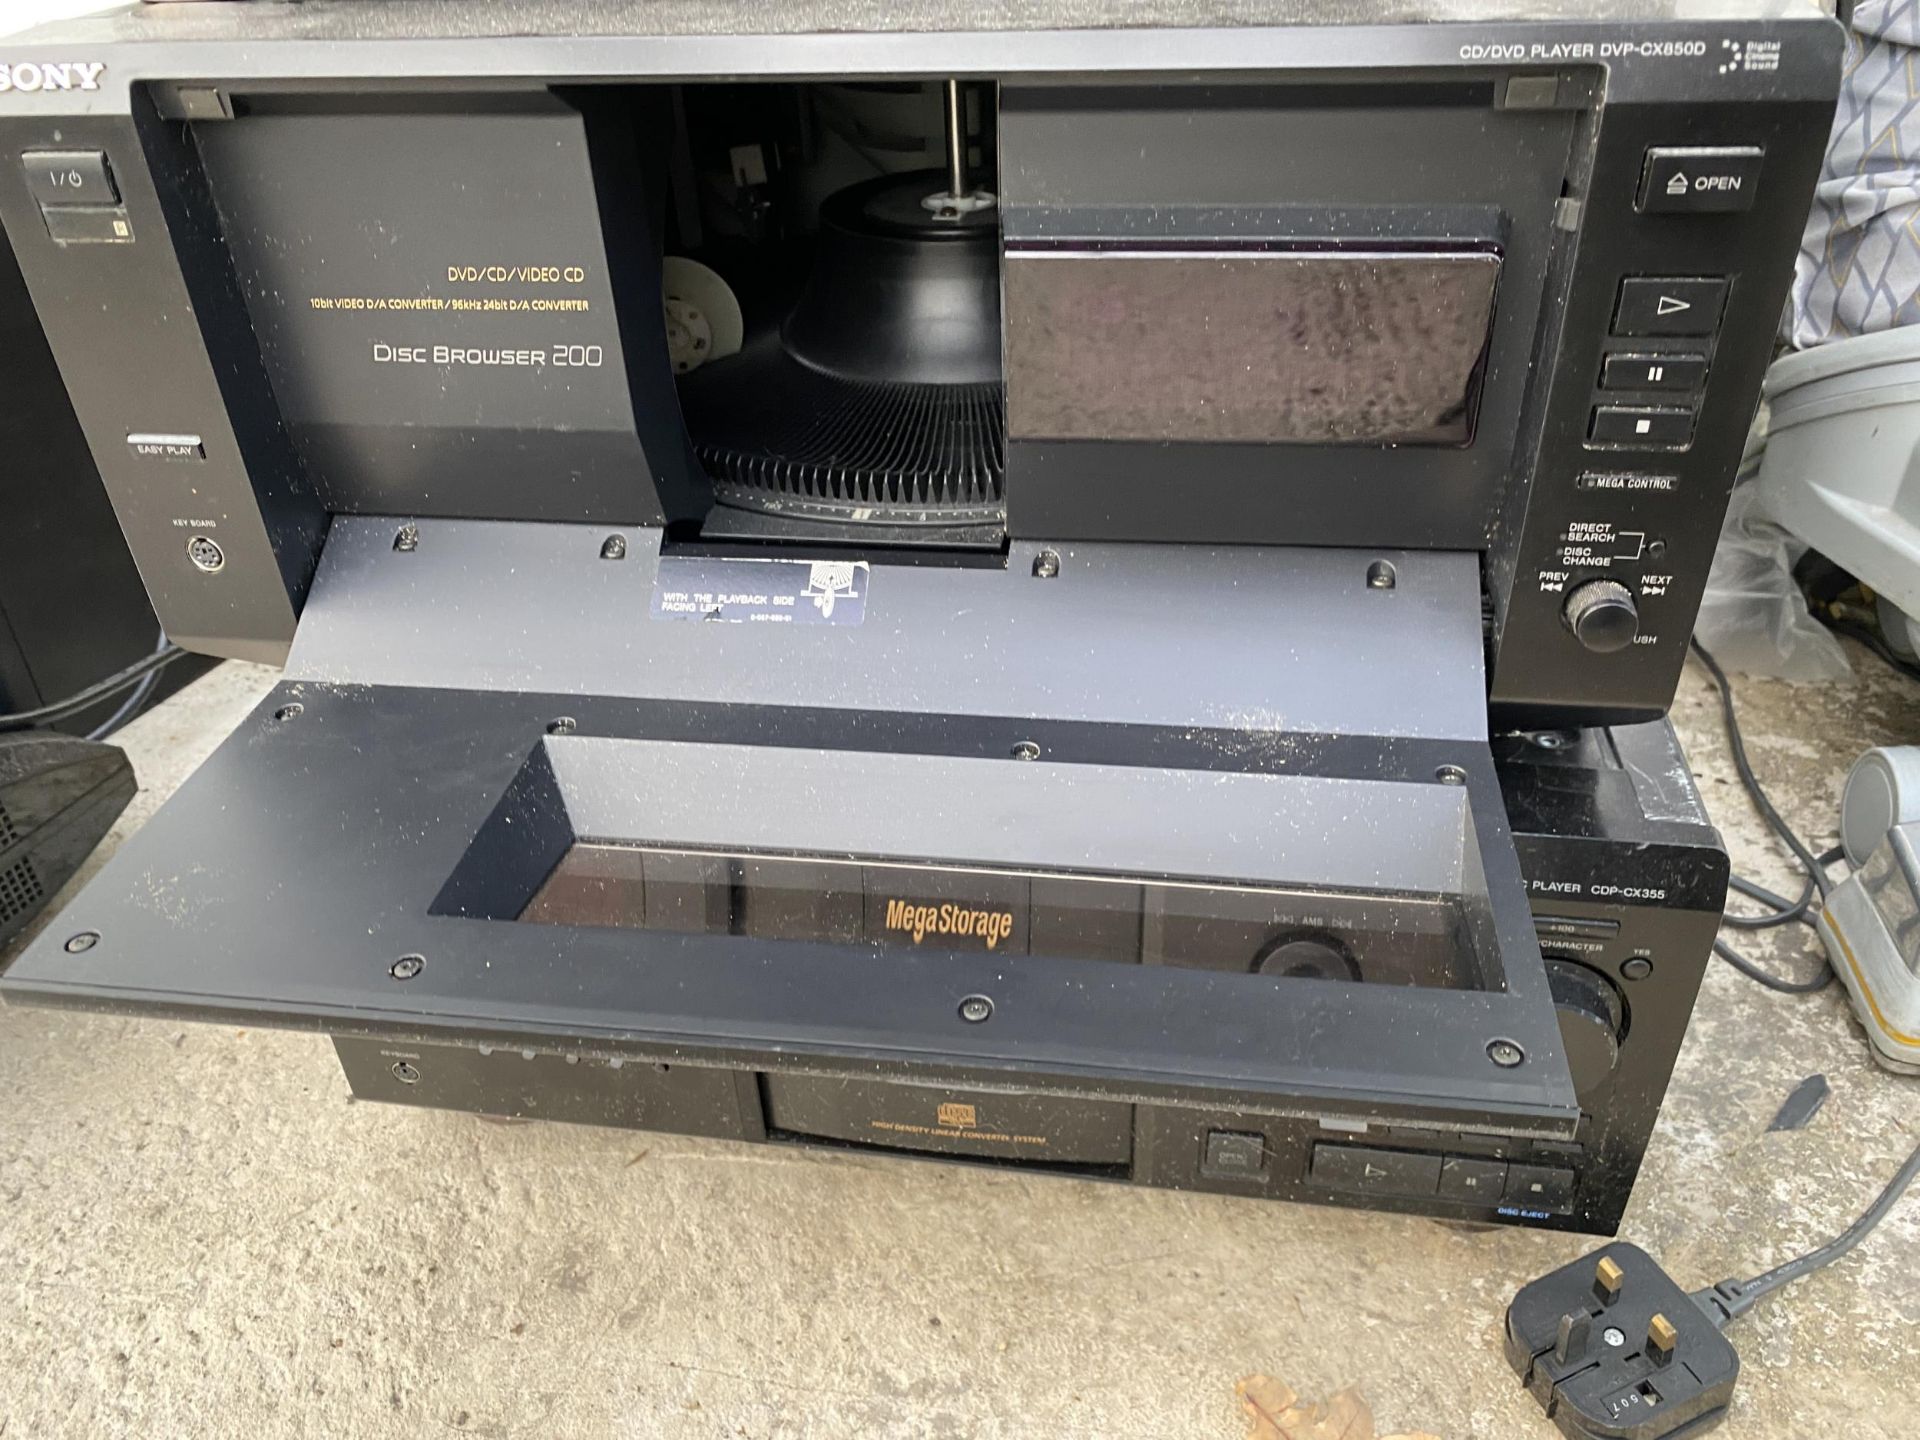 AN ASSORTMENT OF SONY STEREO ITEMS TO INCLUDE A CD DVD PLAYER, MEGA STORAGE AND DISC BROWSER ETC - Image 8 of 9